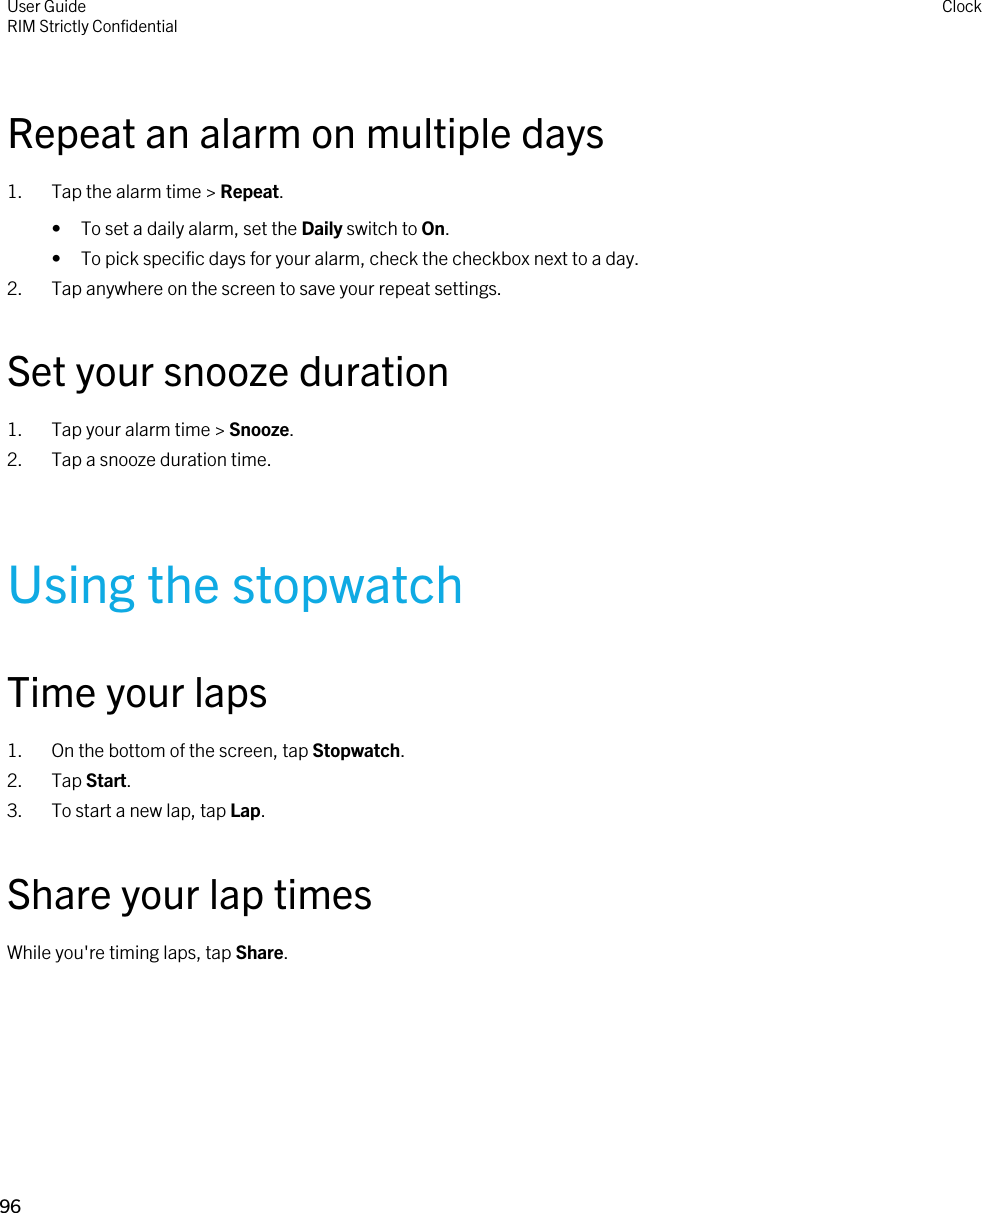 Repeat an alarm on multiple days1. Tap the alarm time &gt; Repeat.• To set a daily alarm, set the Daily switch to On.• To pick specific days for your alarm, check the checkbox next to a day.2. Tap anywhere on the screen to save your repeat settings.Set your snooze duration1. Tap your alarm time &gt; Snooze.2. Tap a snooze duration time.Using the stopwatchTime your laps1. On the bottom of the screen, tap Stopwatch.2. Tap Start.3. To start a new lap, tap Lap.Share your lap timesWhile you&apos;re timing laps, tap Share.User GuideRIM Strictly Confidential Clock96 